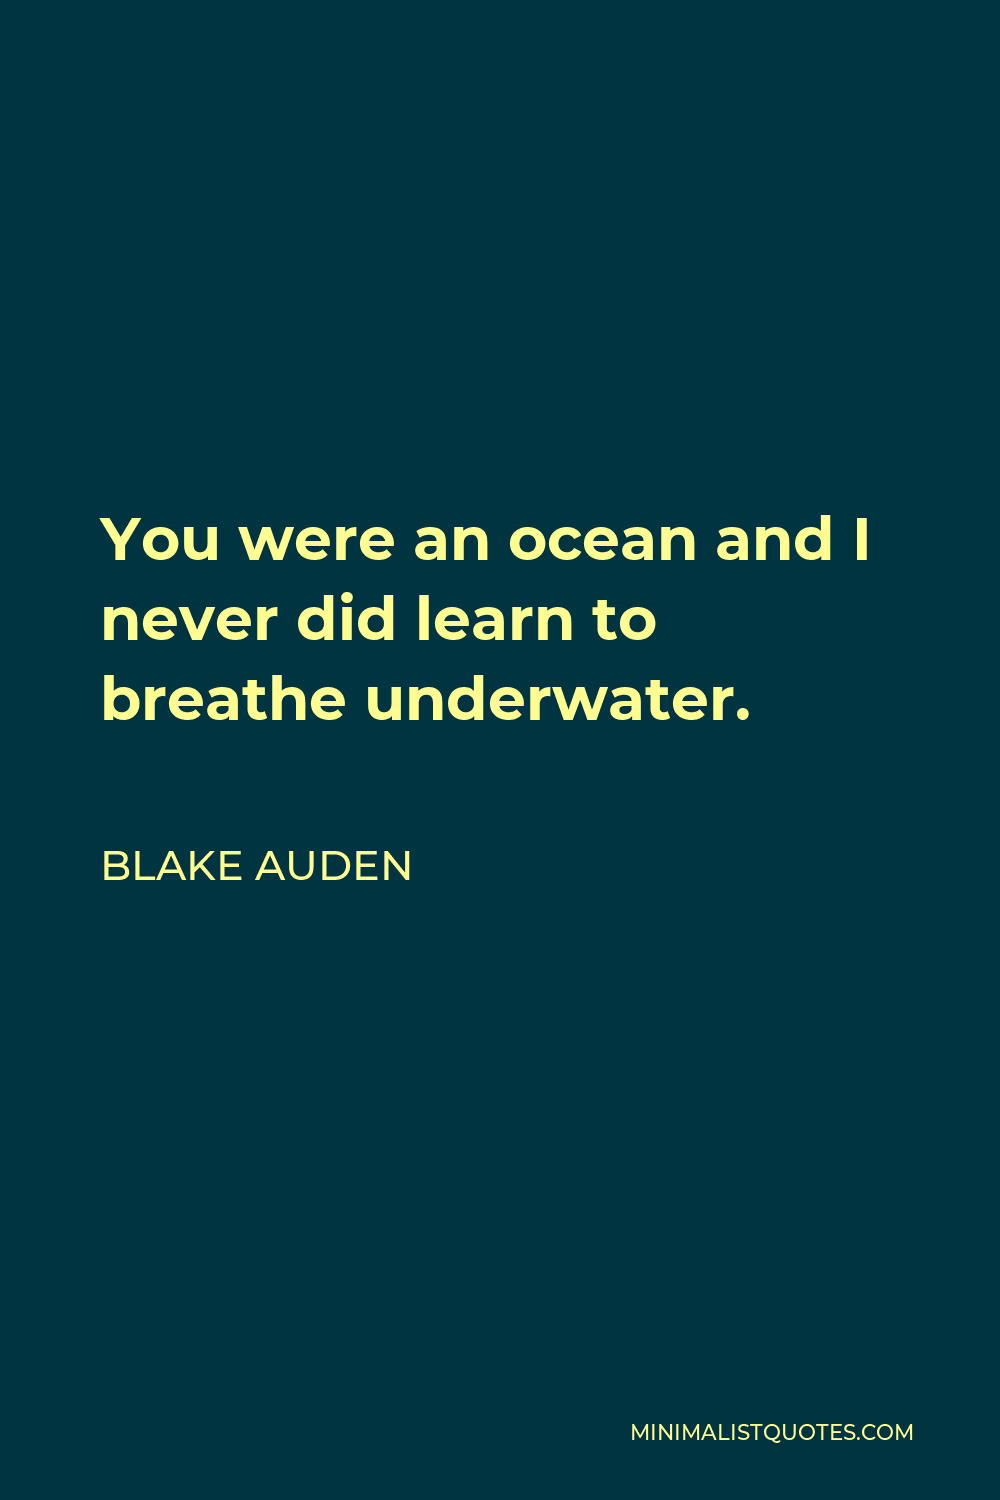 Blake Auden Quote - You were an ocean and I never did learn to breathe underwater.